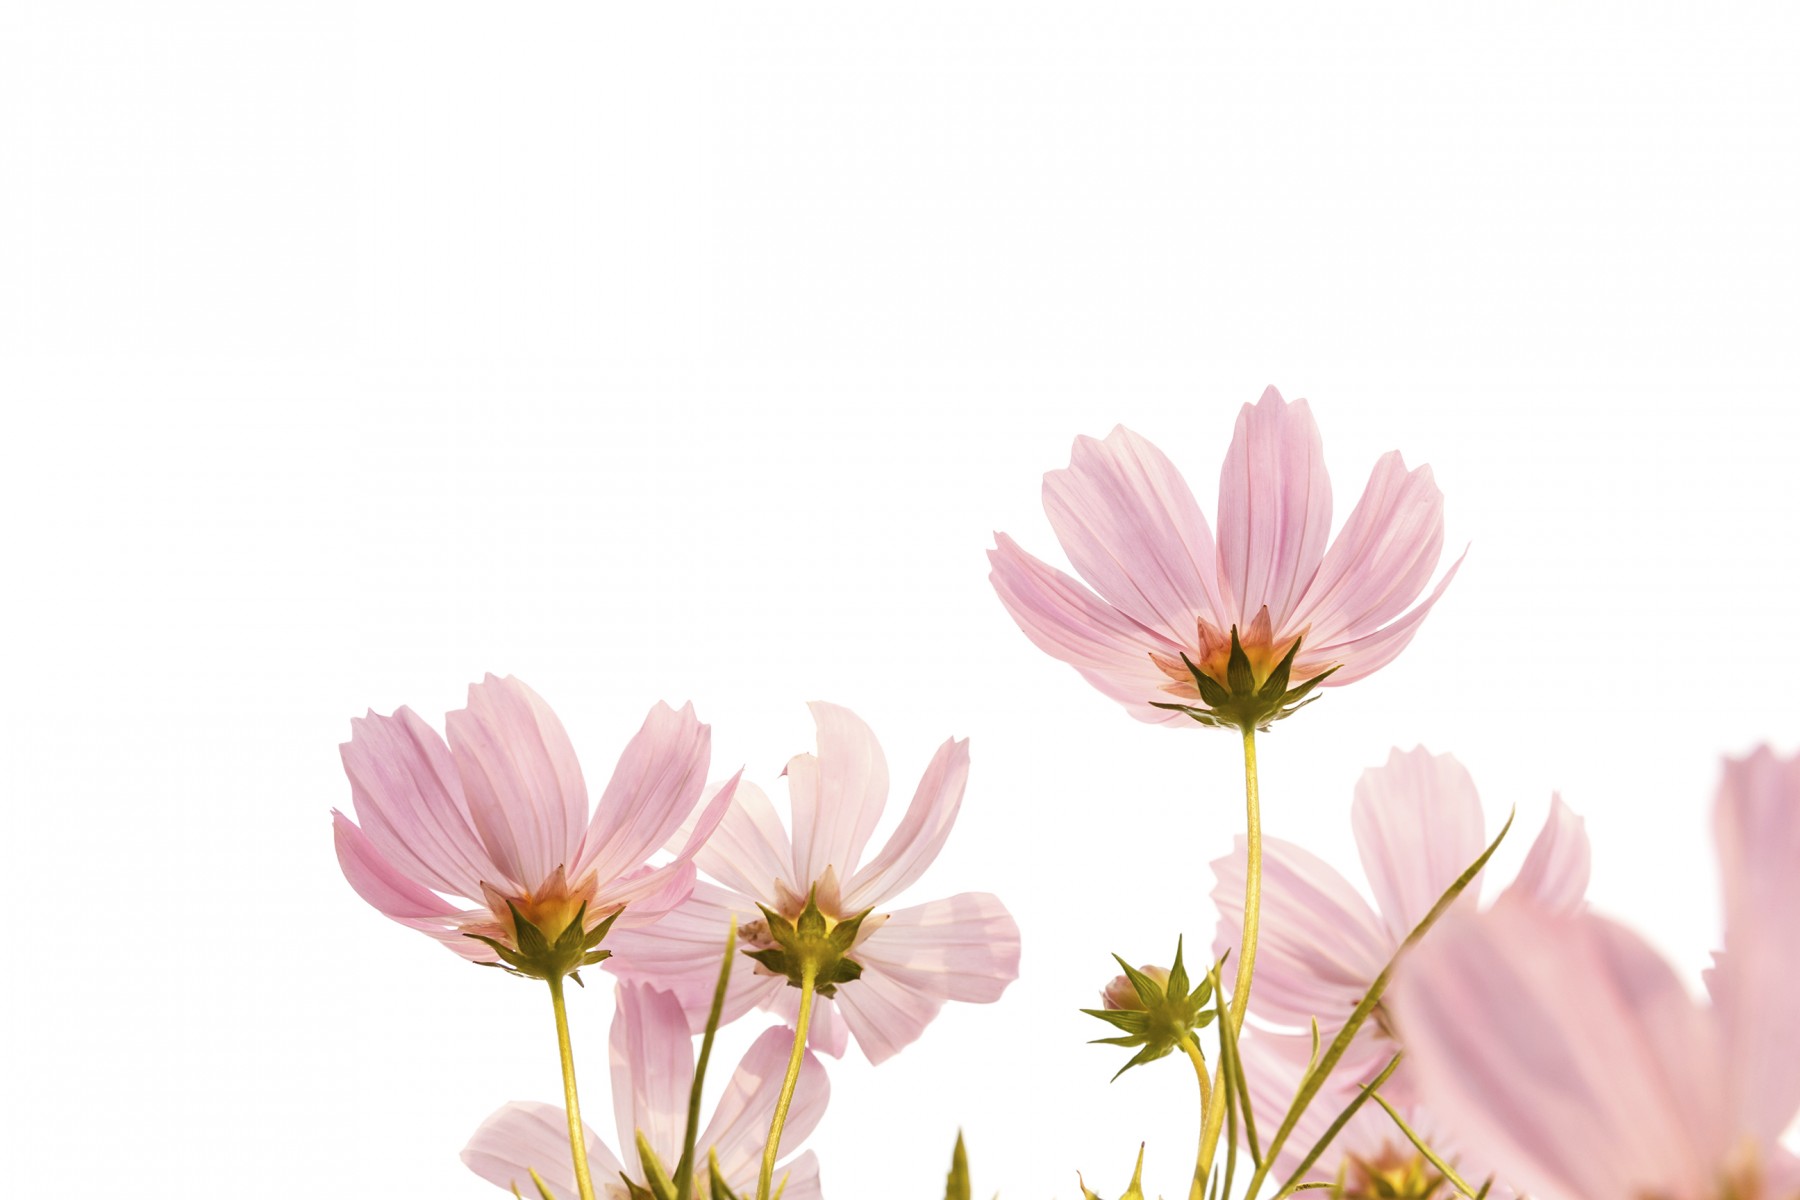 Pink cosmos flowers on white background.